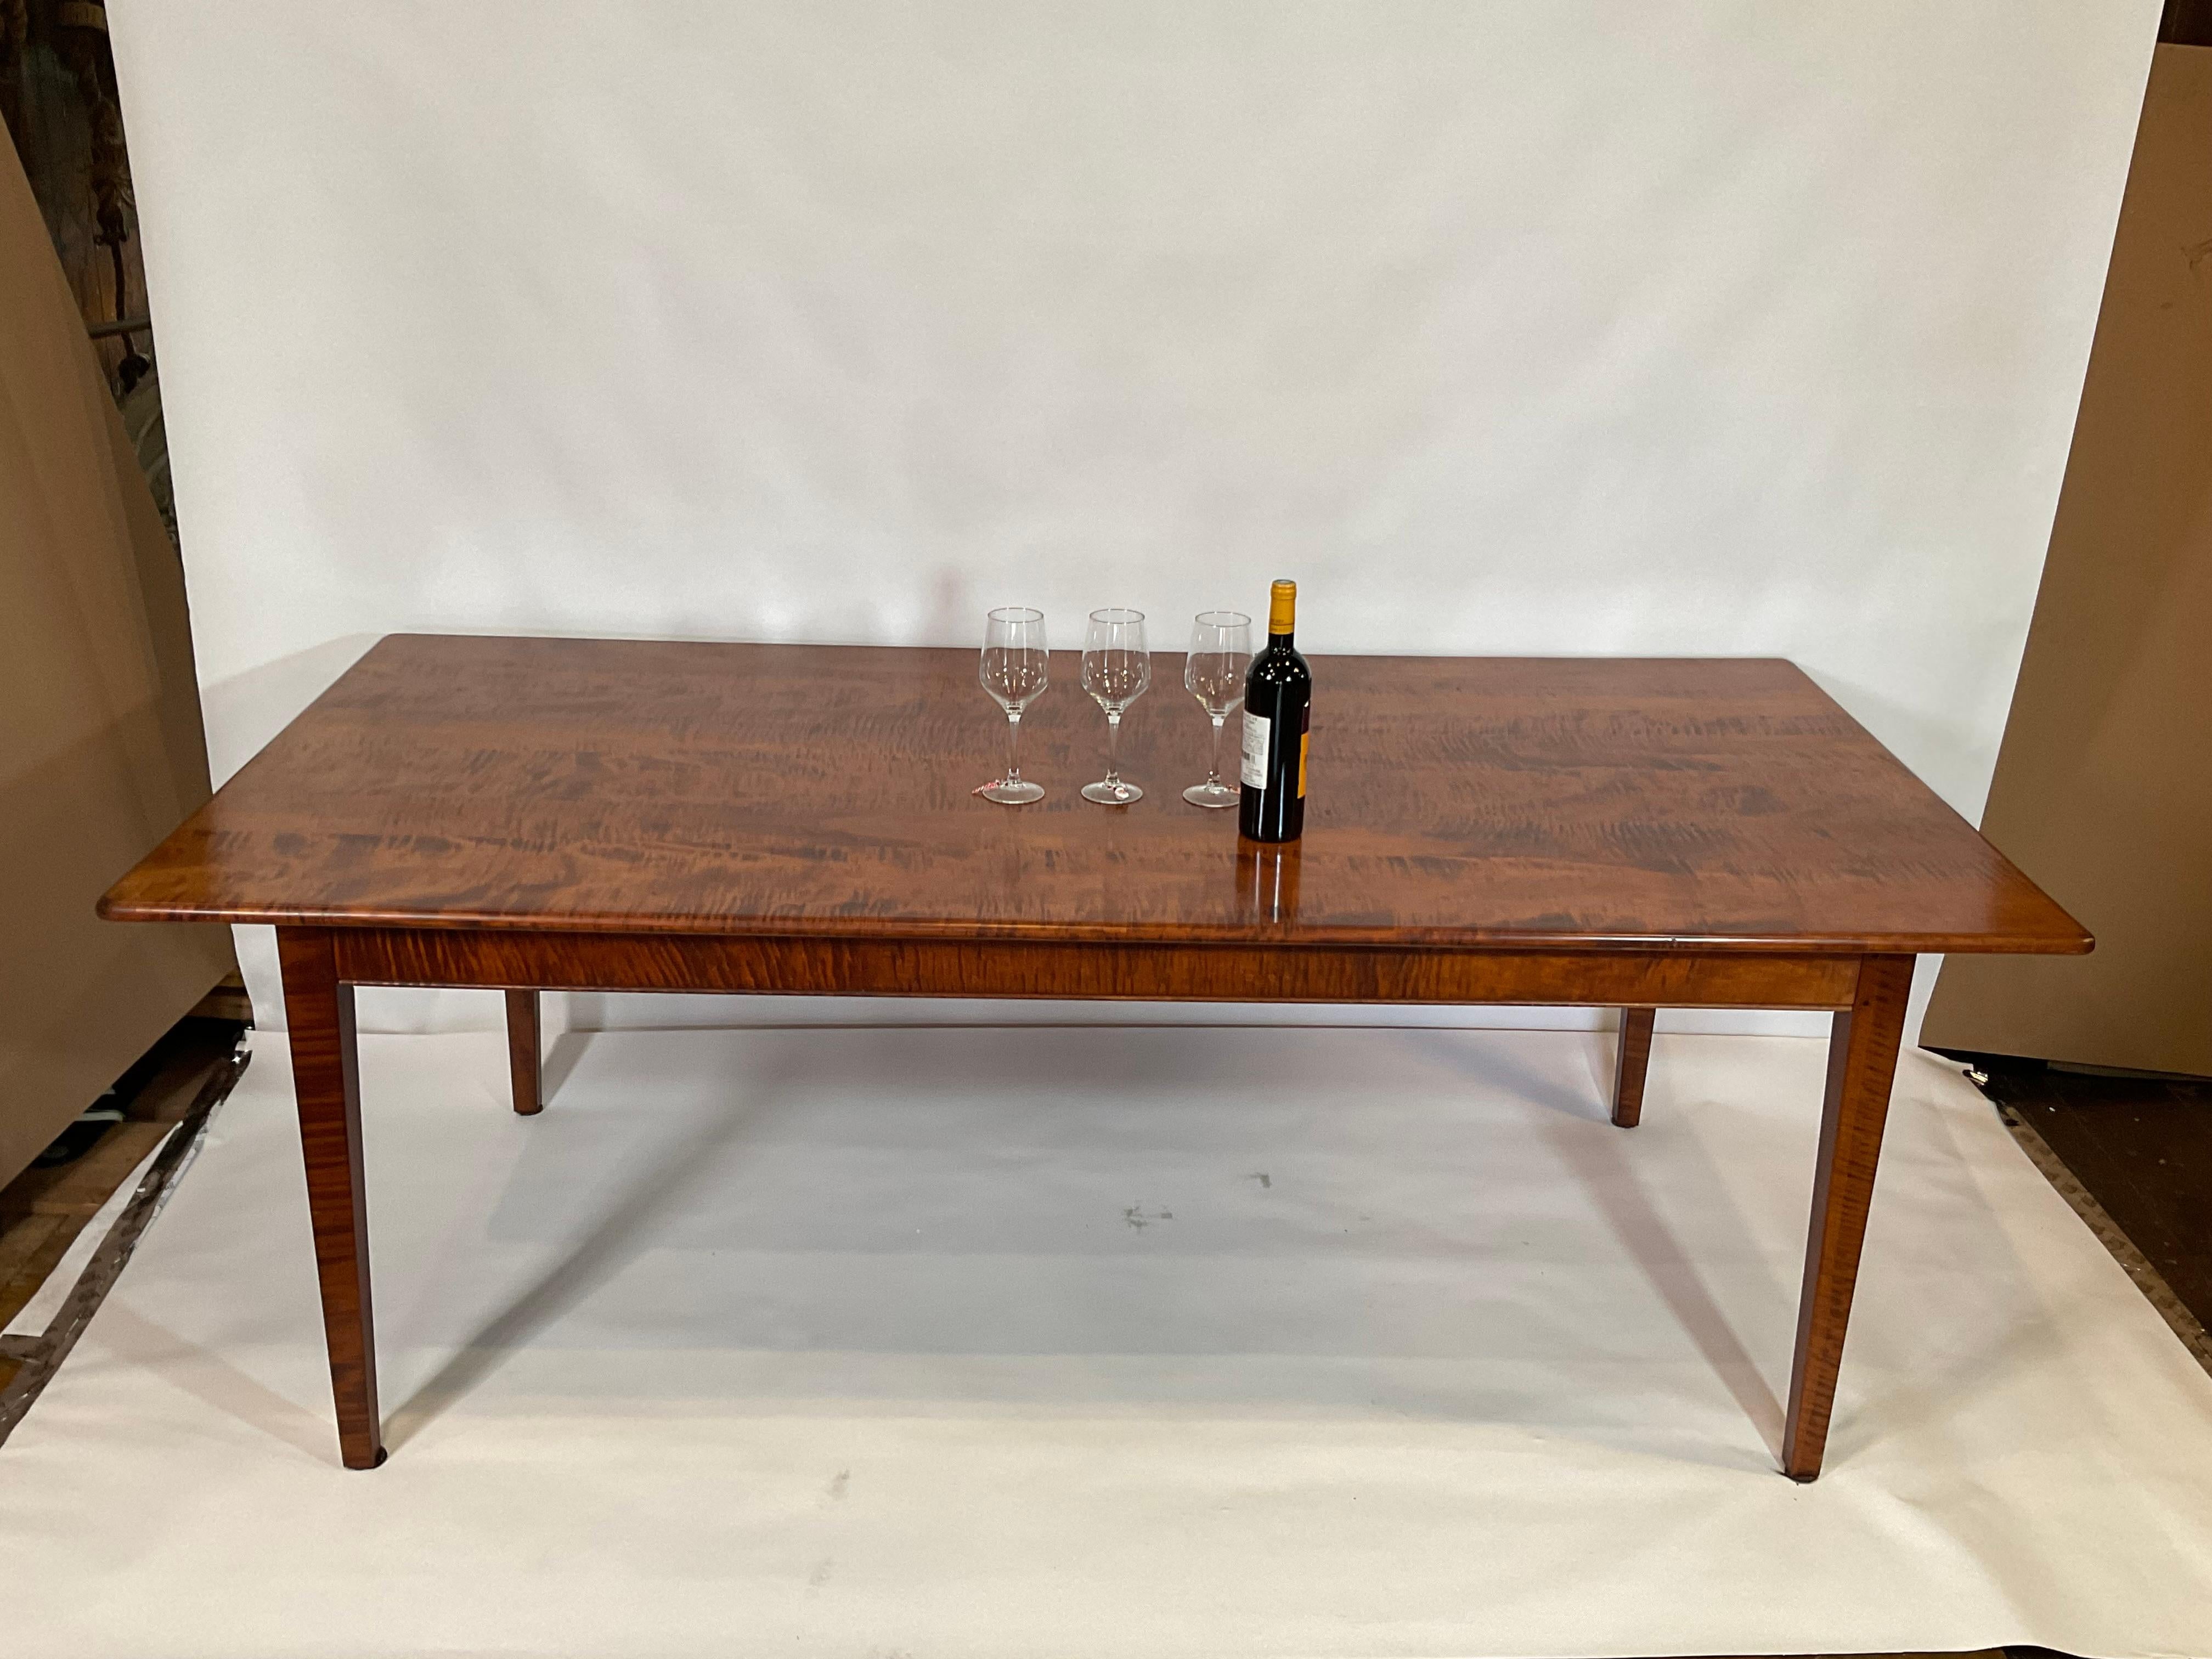 Spectacular rare lumber dining table. Fantastic selection of tiger grained maple. Beautiful form. Tapered legs. Custom made.

Weight: 82 LBS
Overall Dimensions: 29” H x 40” W x 82” L
Made: America
Material: Maple
Date: 2000